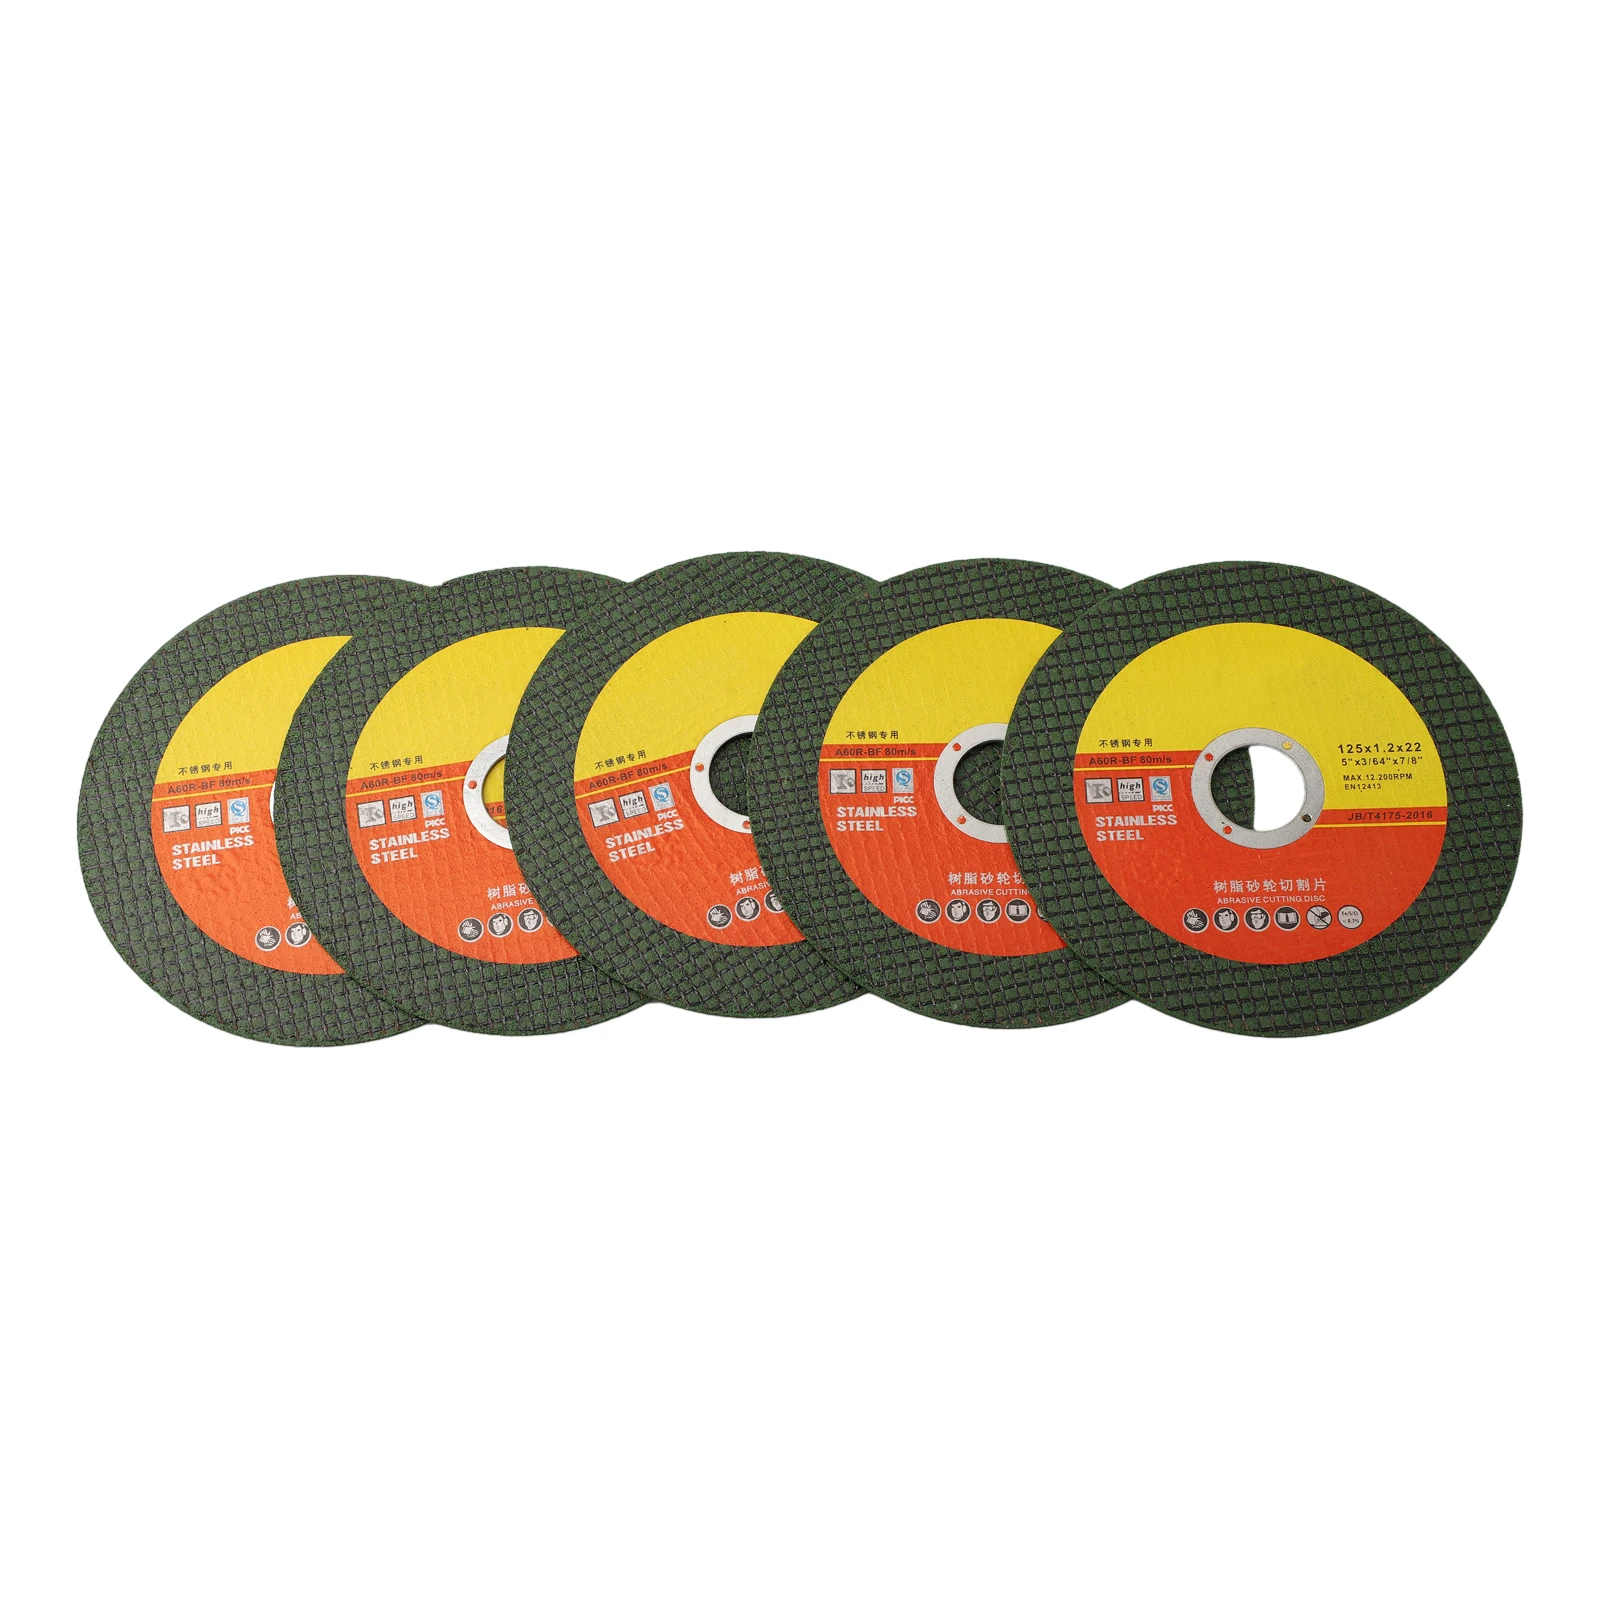 5pcs 125mm/ 5 Inch Cutting Disc Angle Grinder Stainless Steel Grinding Resin Double Mesh For Grinding Stone Meta Land Polishing carbon steel grinding wheel titanium coating diamond coated discs gold for carbide stone angle grinder polishing